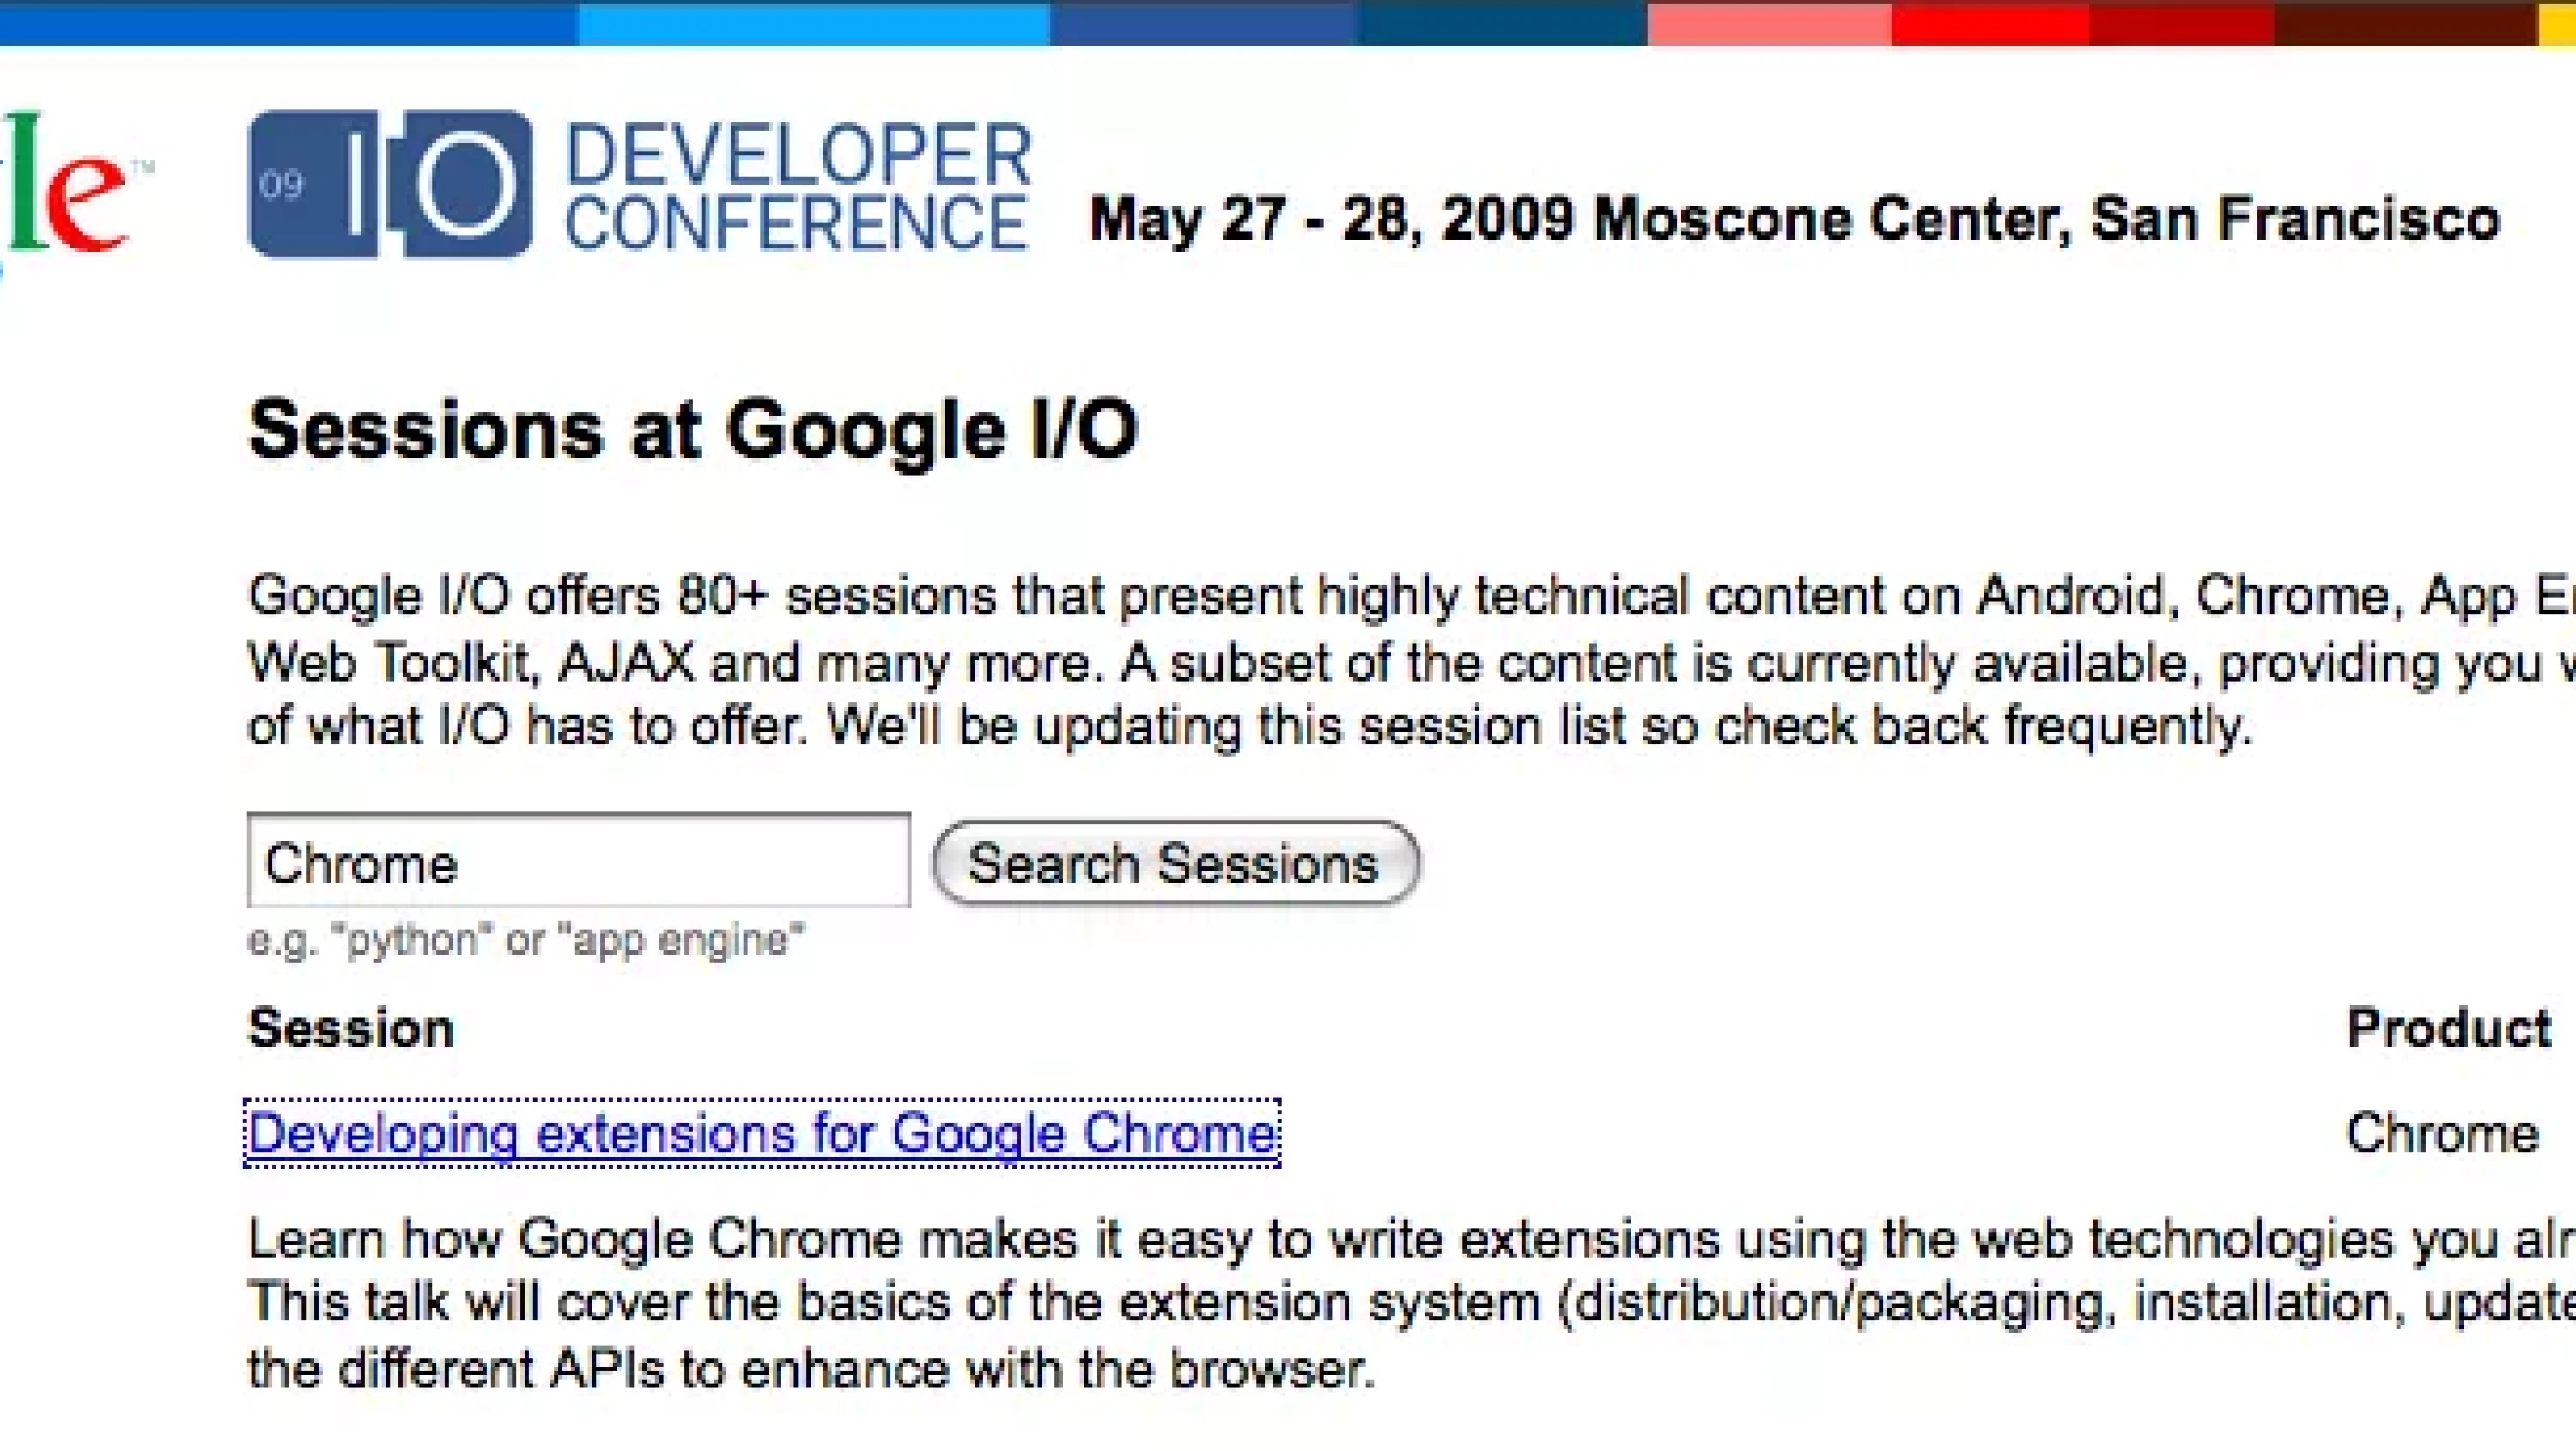 Chrome Extensions Session at Google I/O 2009